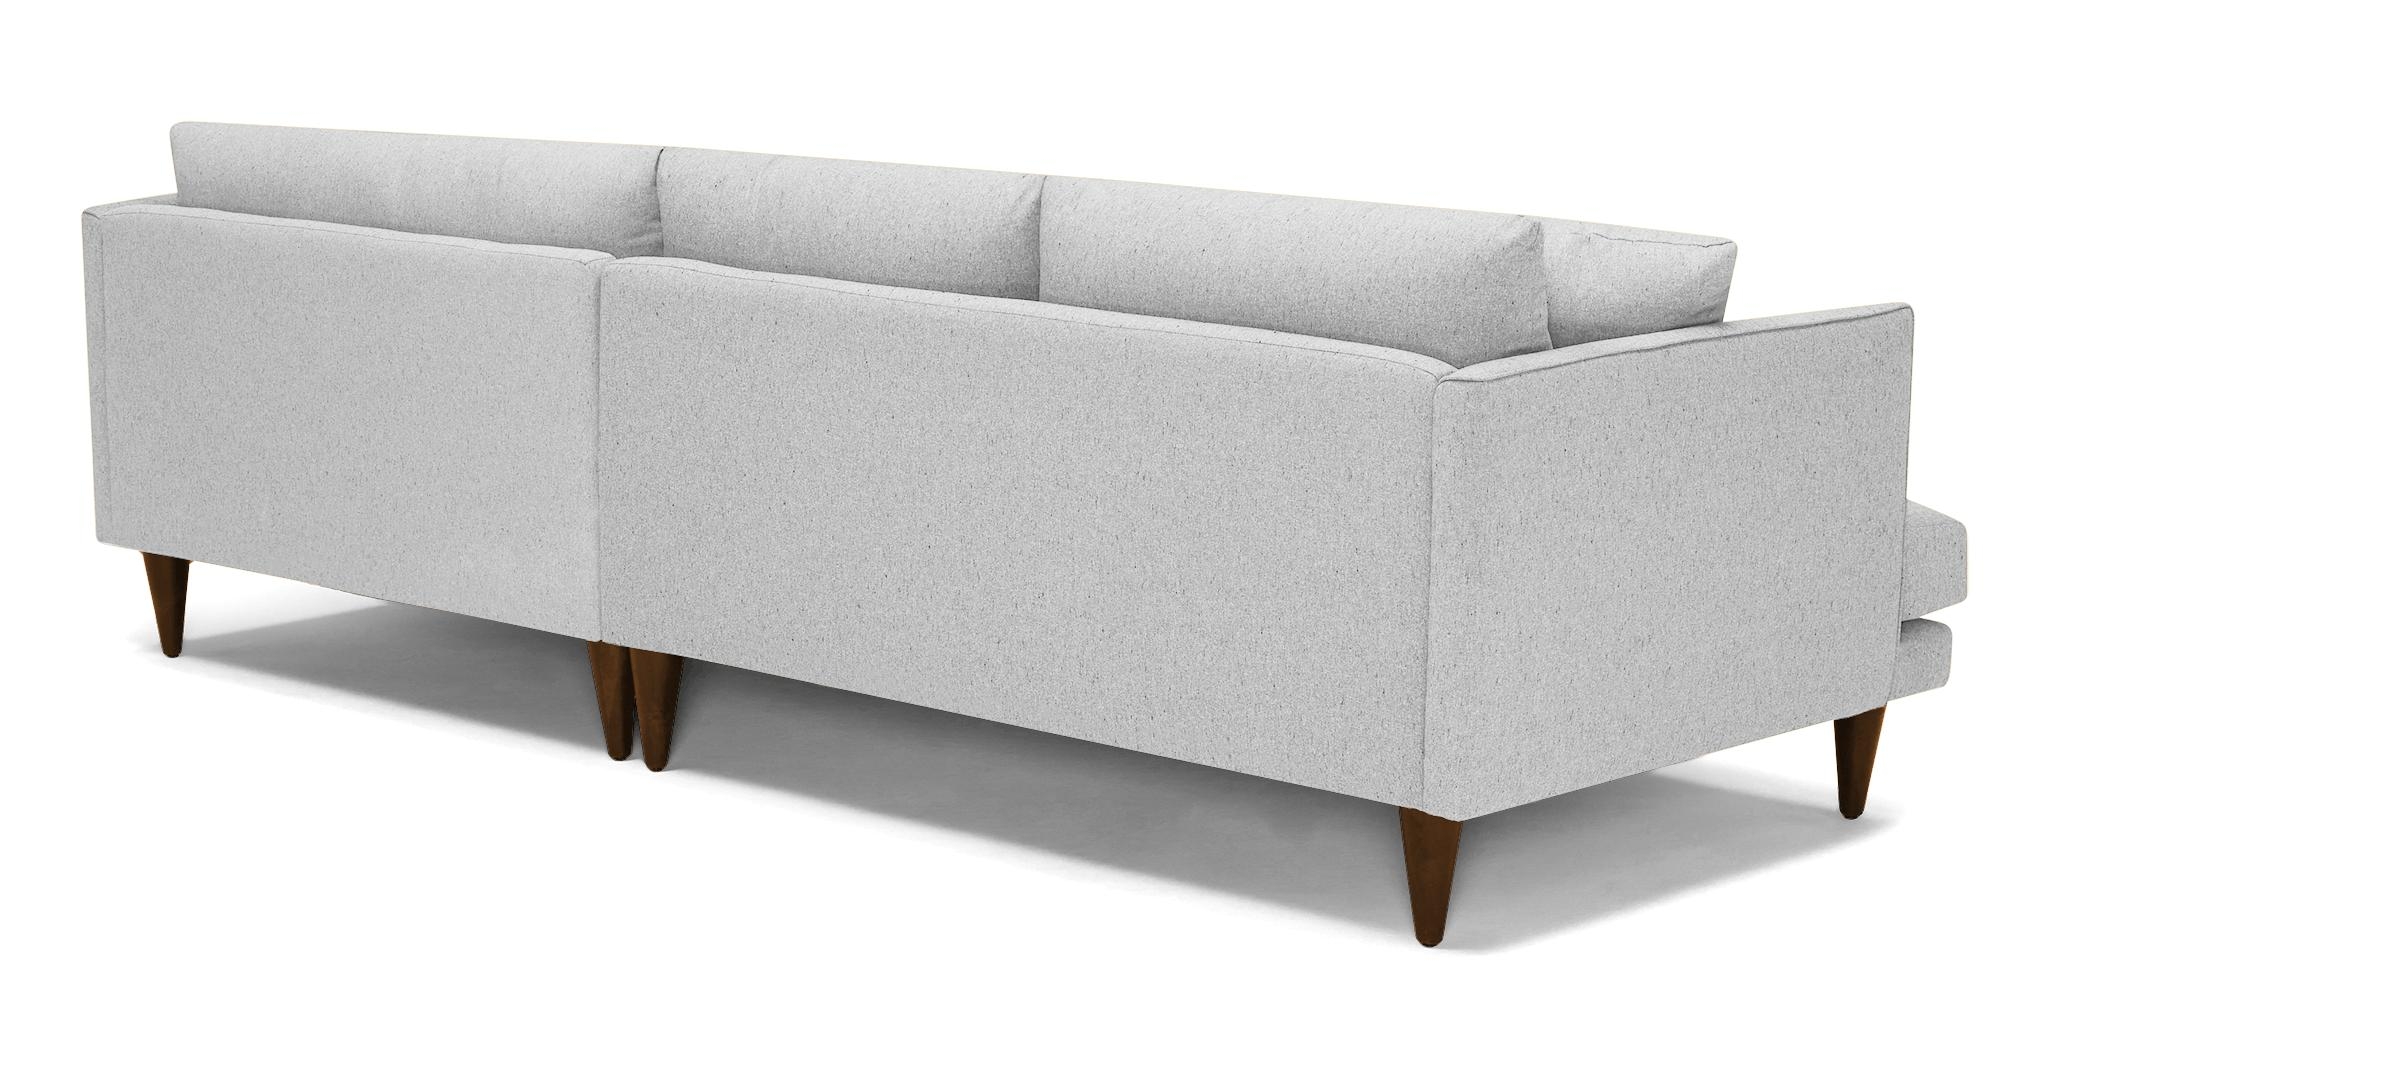 Gray Lewis Mid Century Modern Sectional - Milo Dove - Mocha - Right - Cone - Image 3